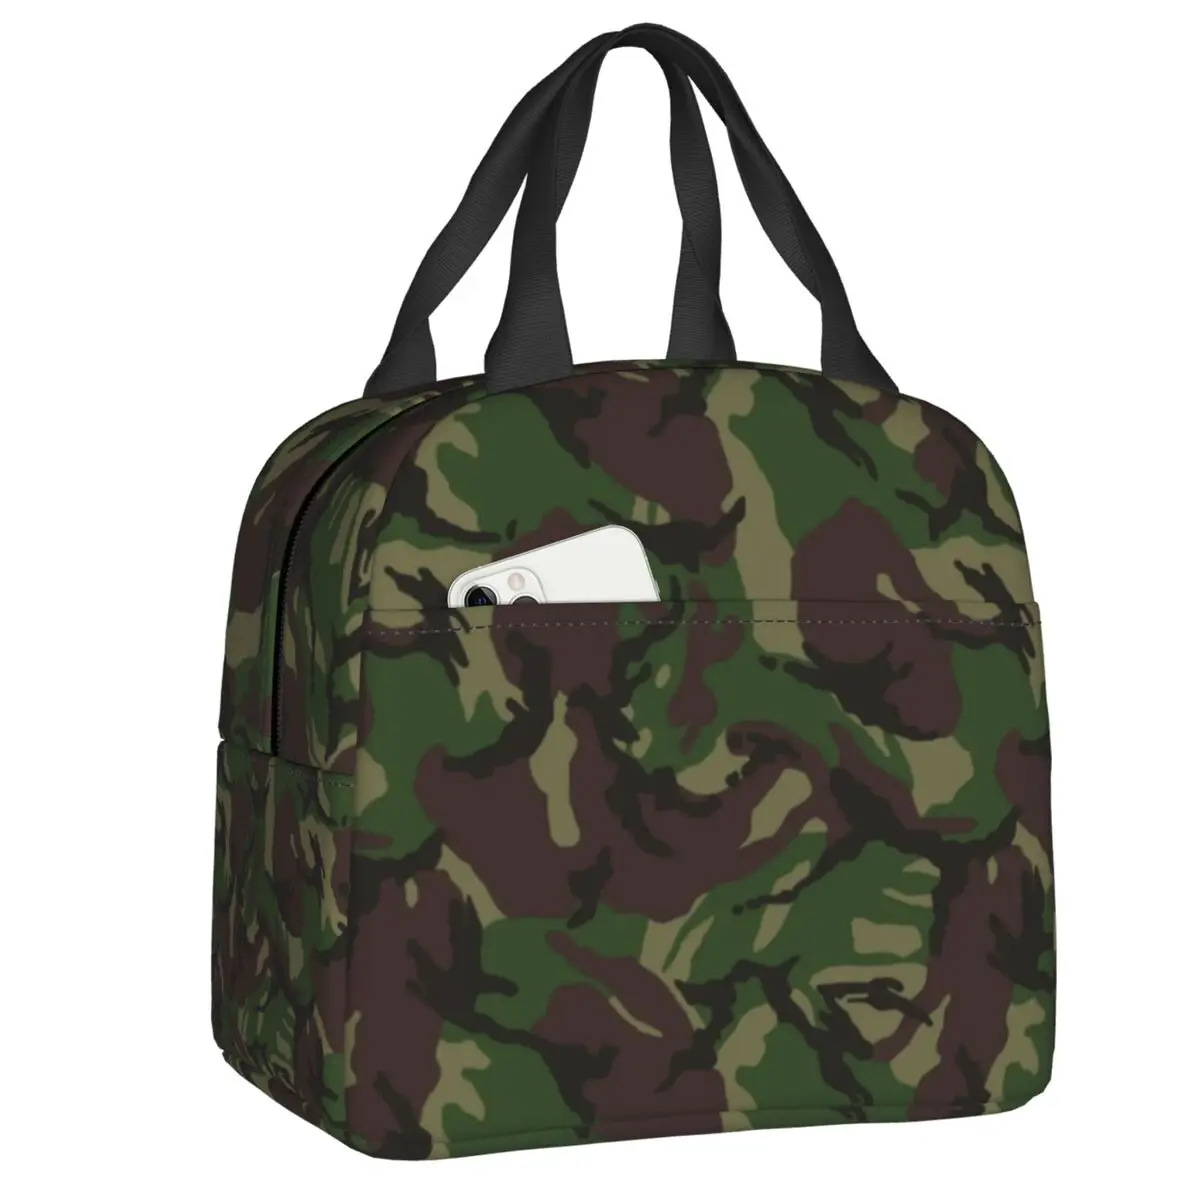 

British DPM Camo Insulated Lunch Bags for Women Military Army Camouflage Cooler Thermal Food Lunch Box Outdoor Camping Travel